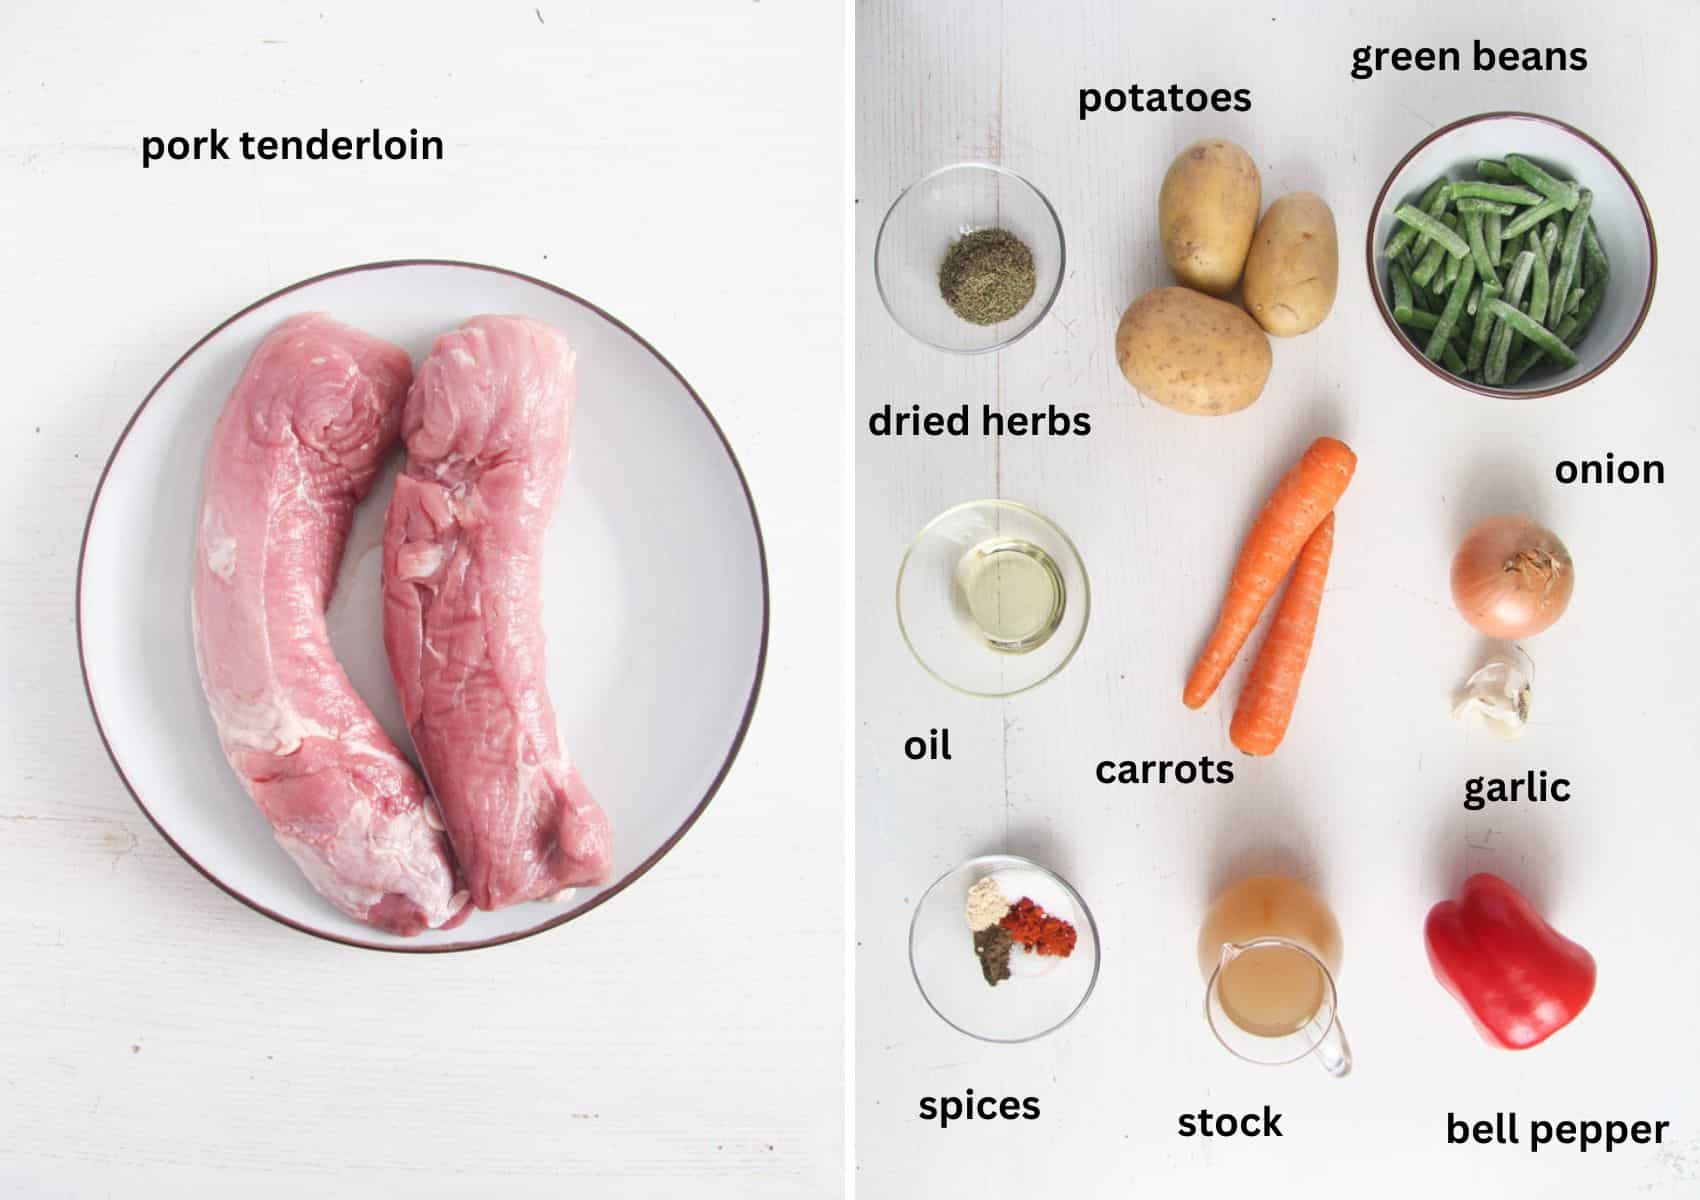 collage of two pictures of raw pork tenderloin and the other ingredients for cooking it, potatoes and vegetables.